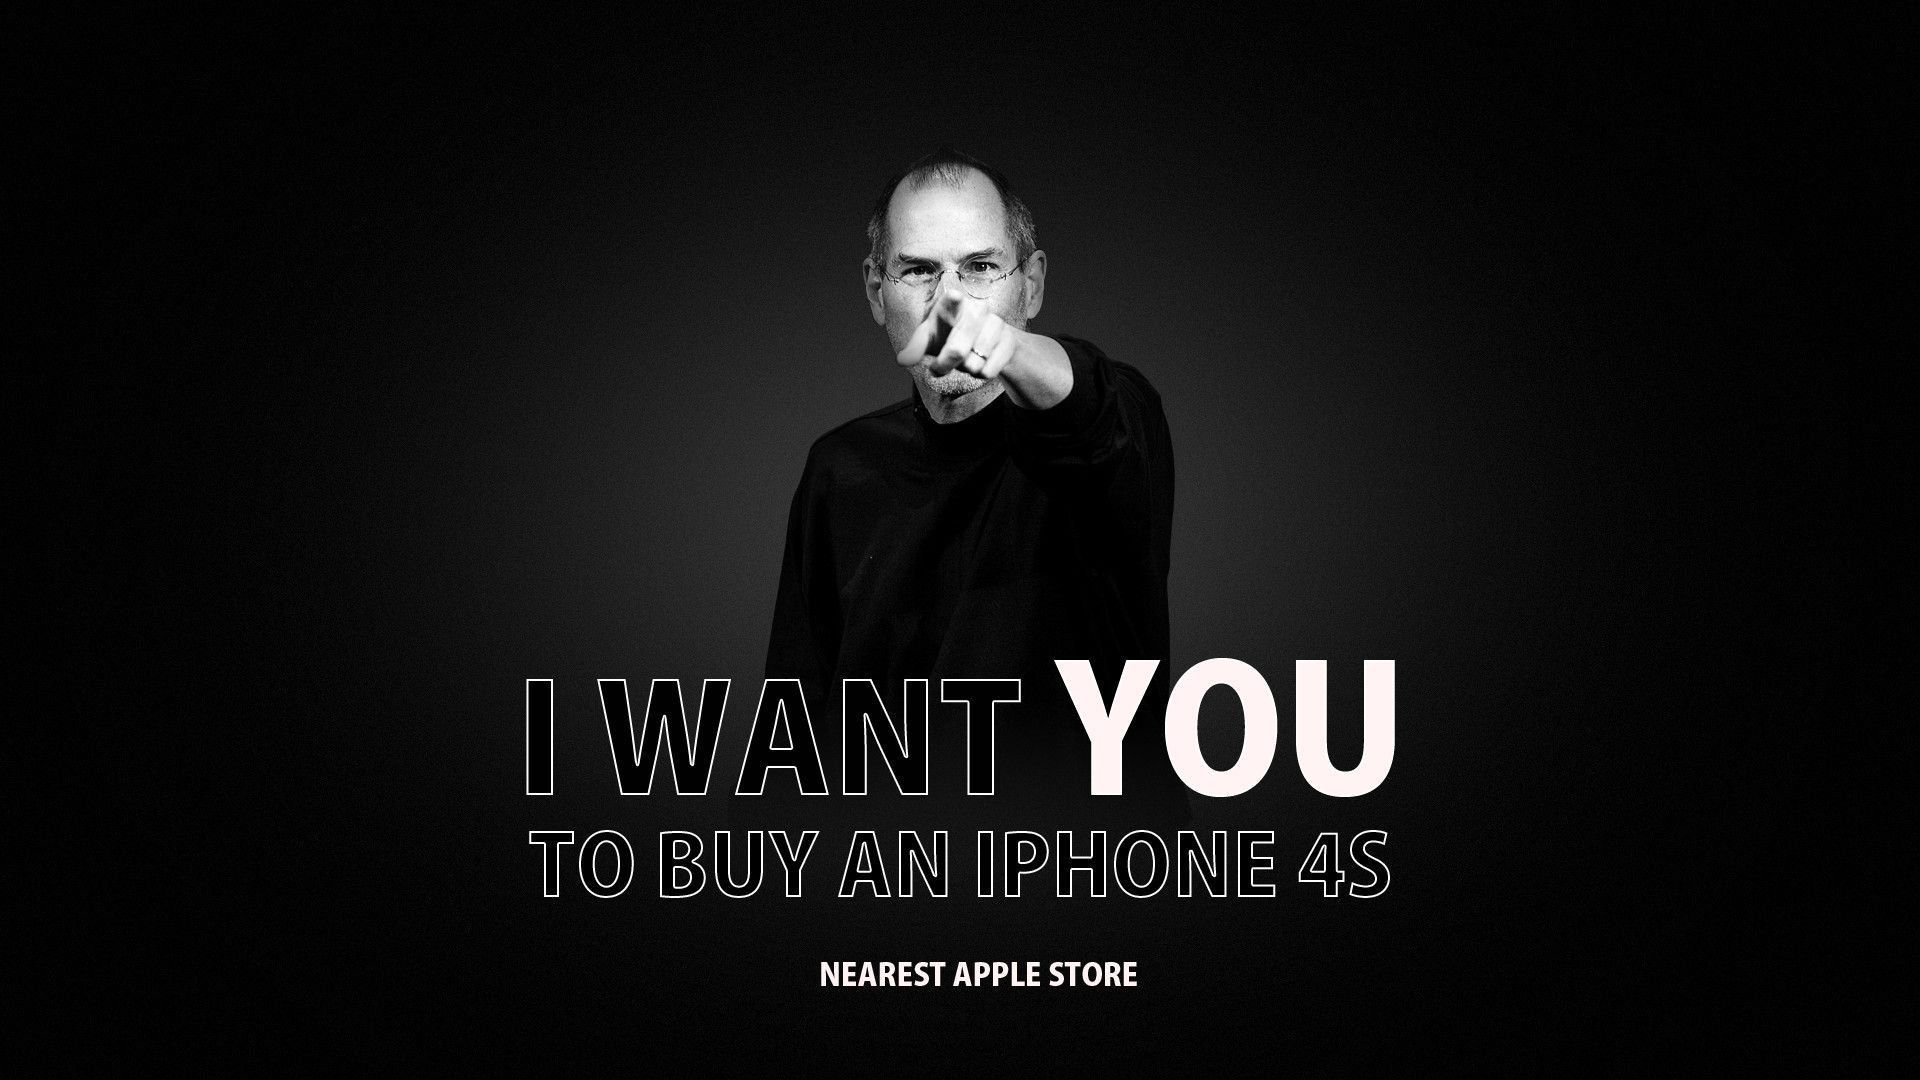 Top 10 Steve Jobs quotes on life and work - iGeeksBlog | Steve jobs quotes, Steve  jobs, Iphone wallpaper 10